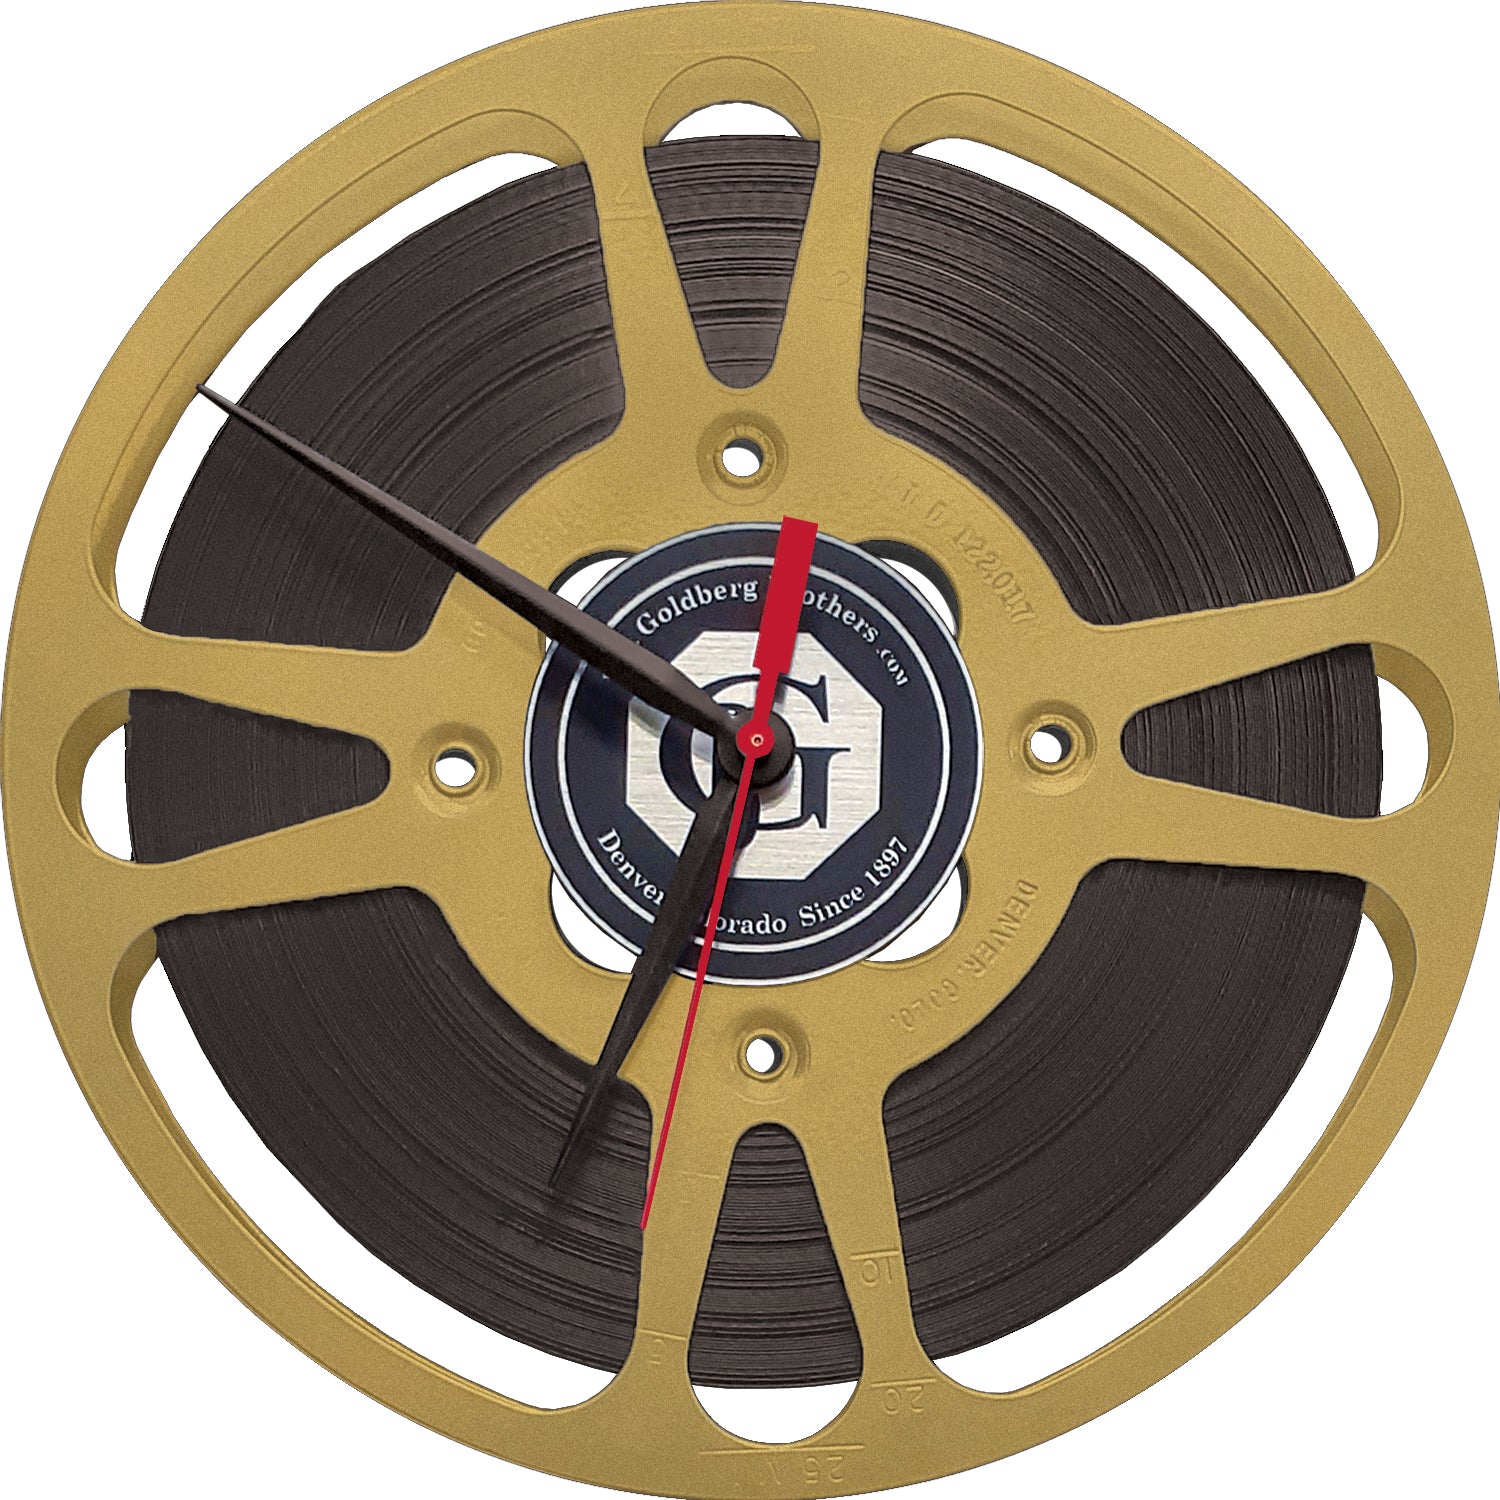 Film Reel Wall Clock-Clock-Home Movie Decor with Home Theater Mart - Located in Chicago, IL